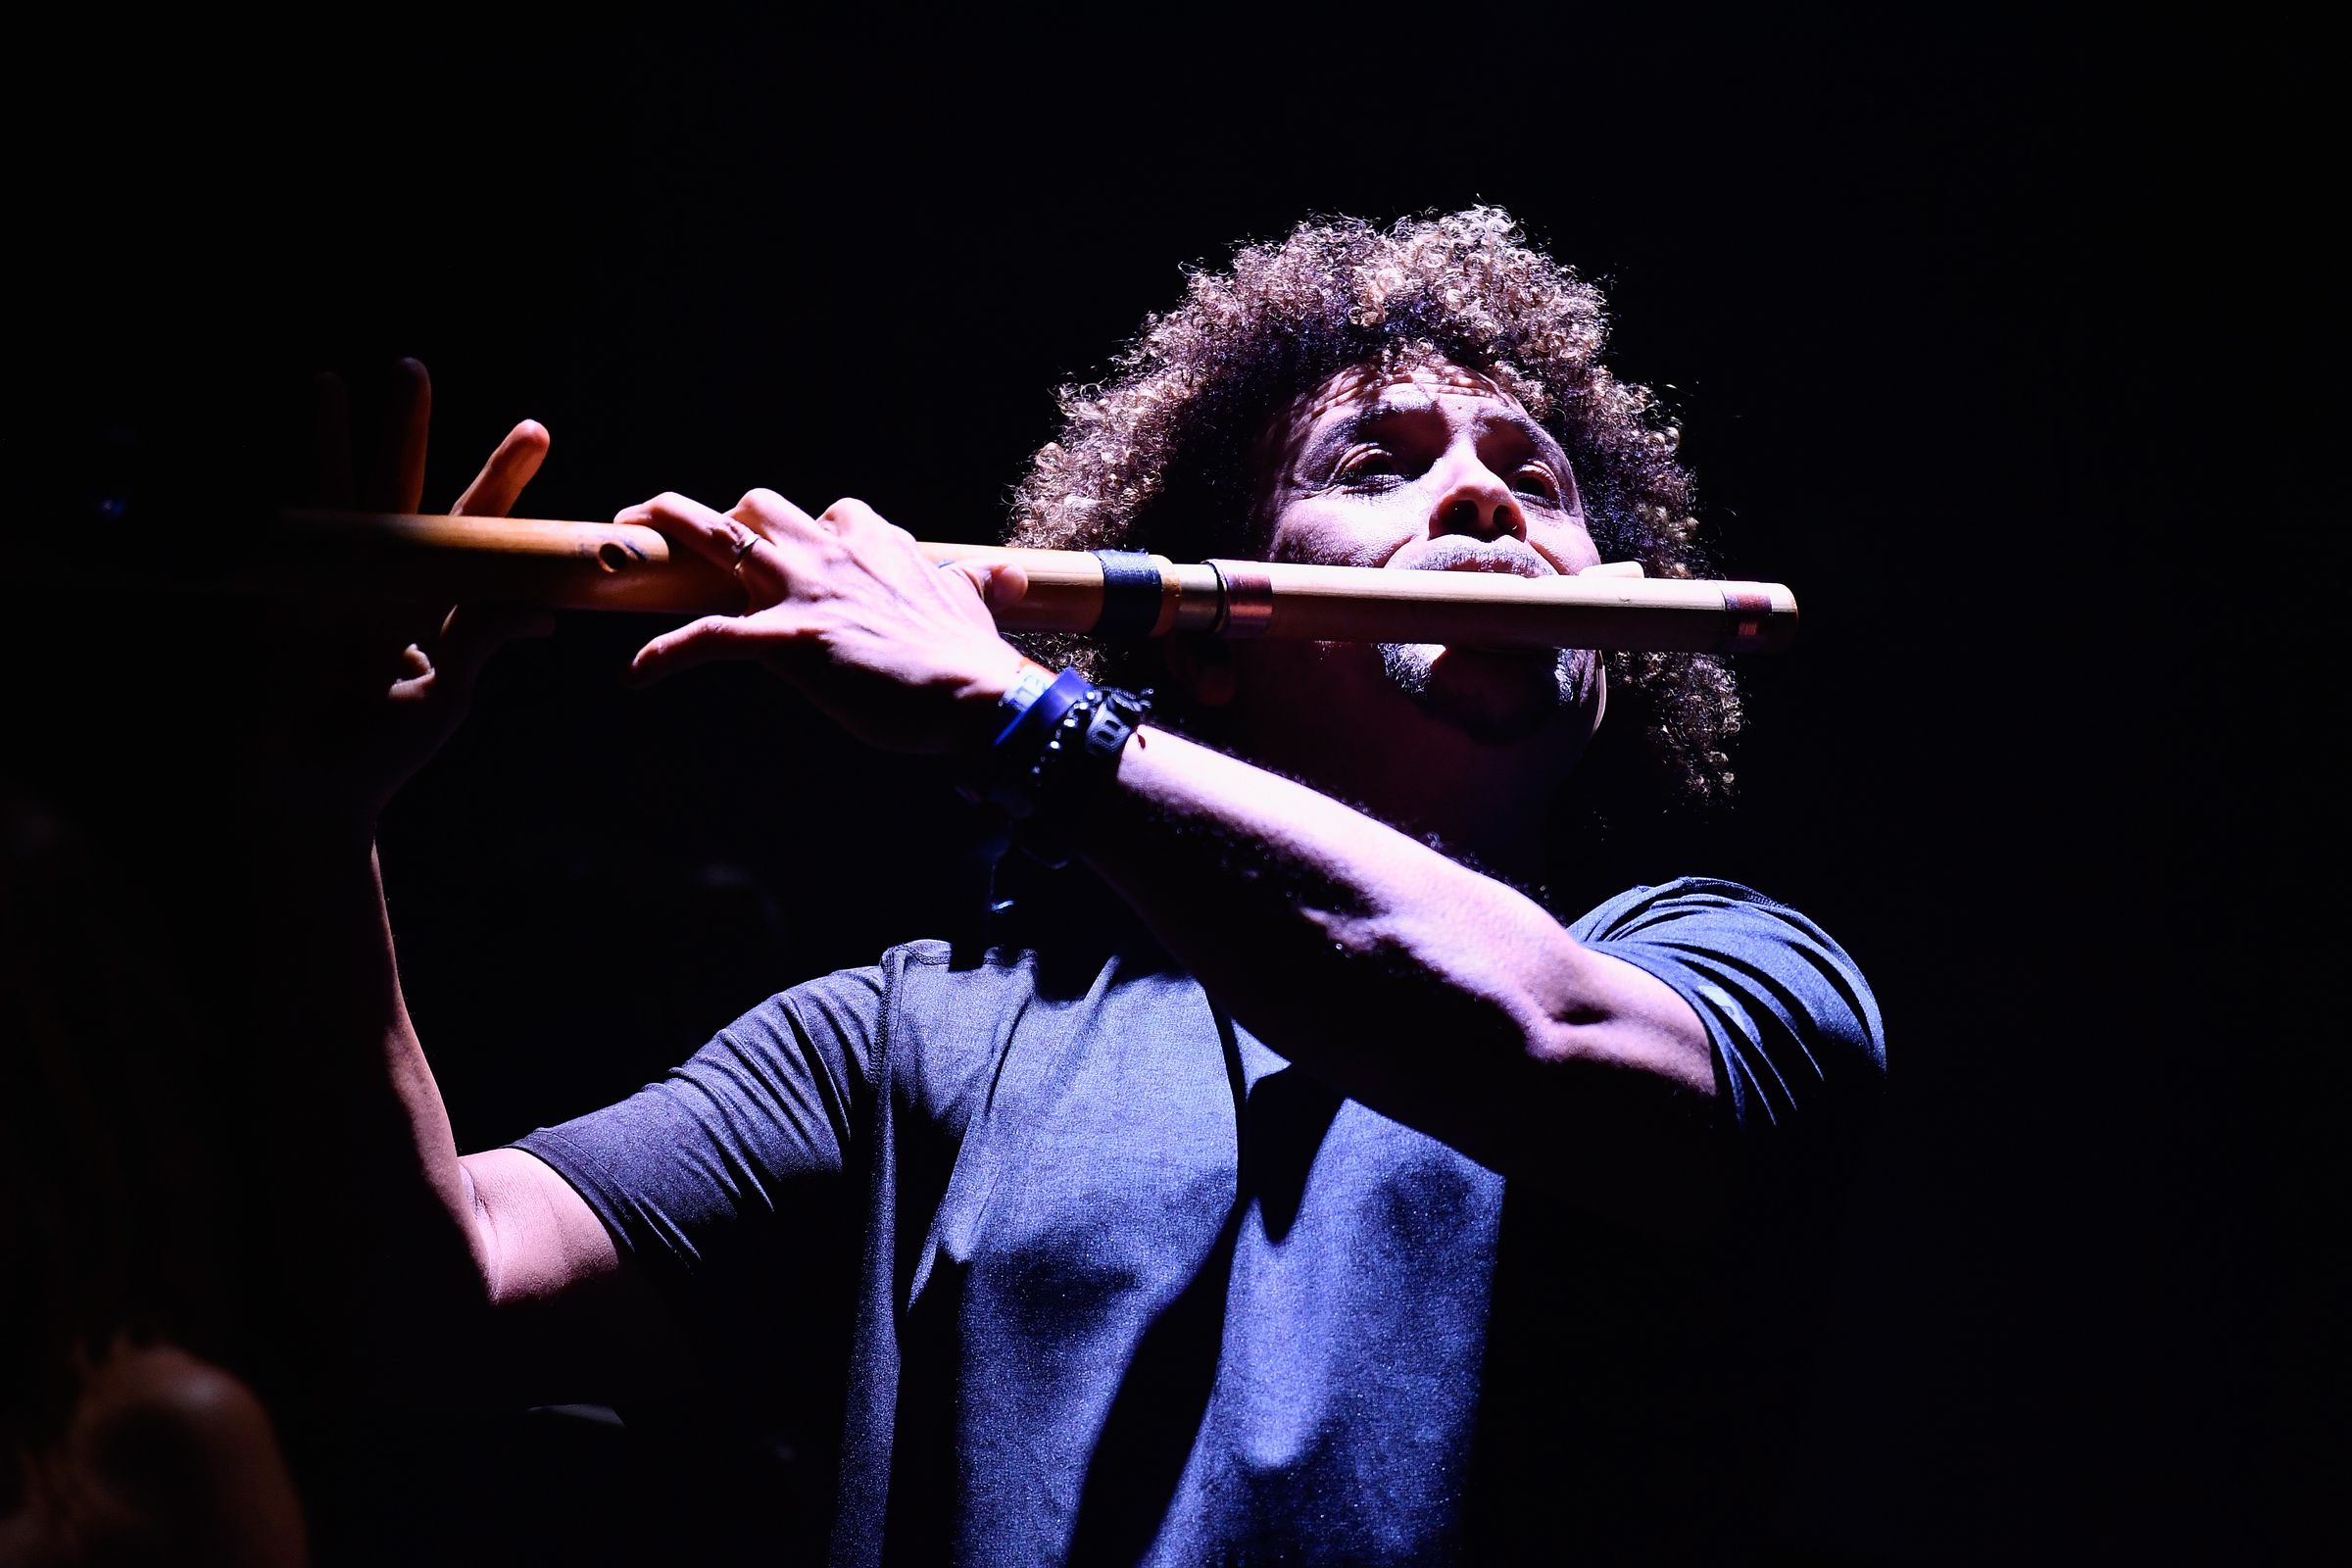 A photo of Pedro Eustache playing the flute